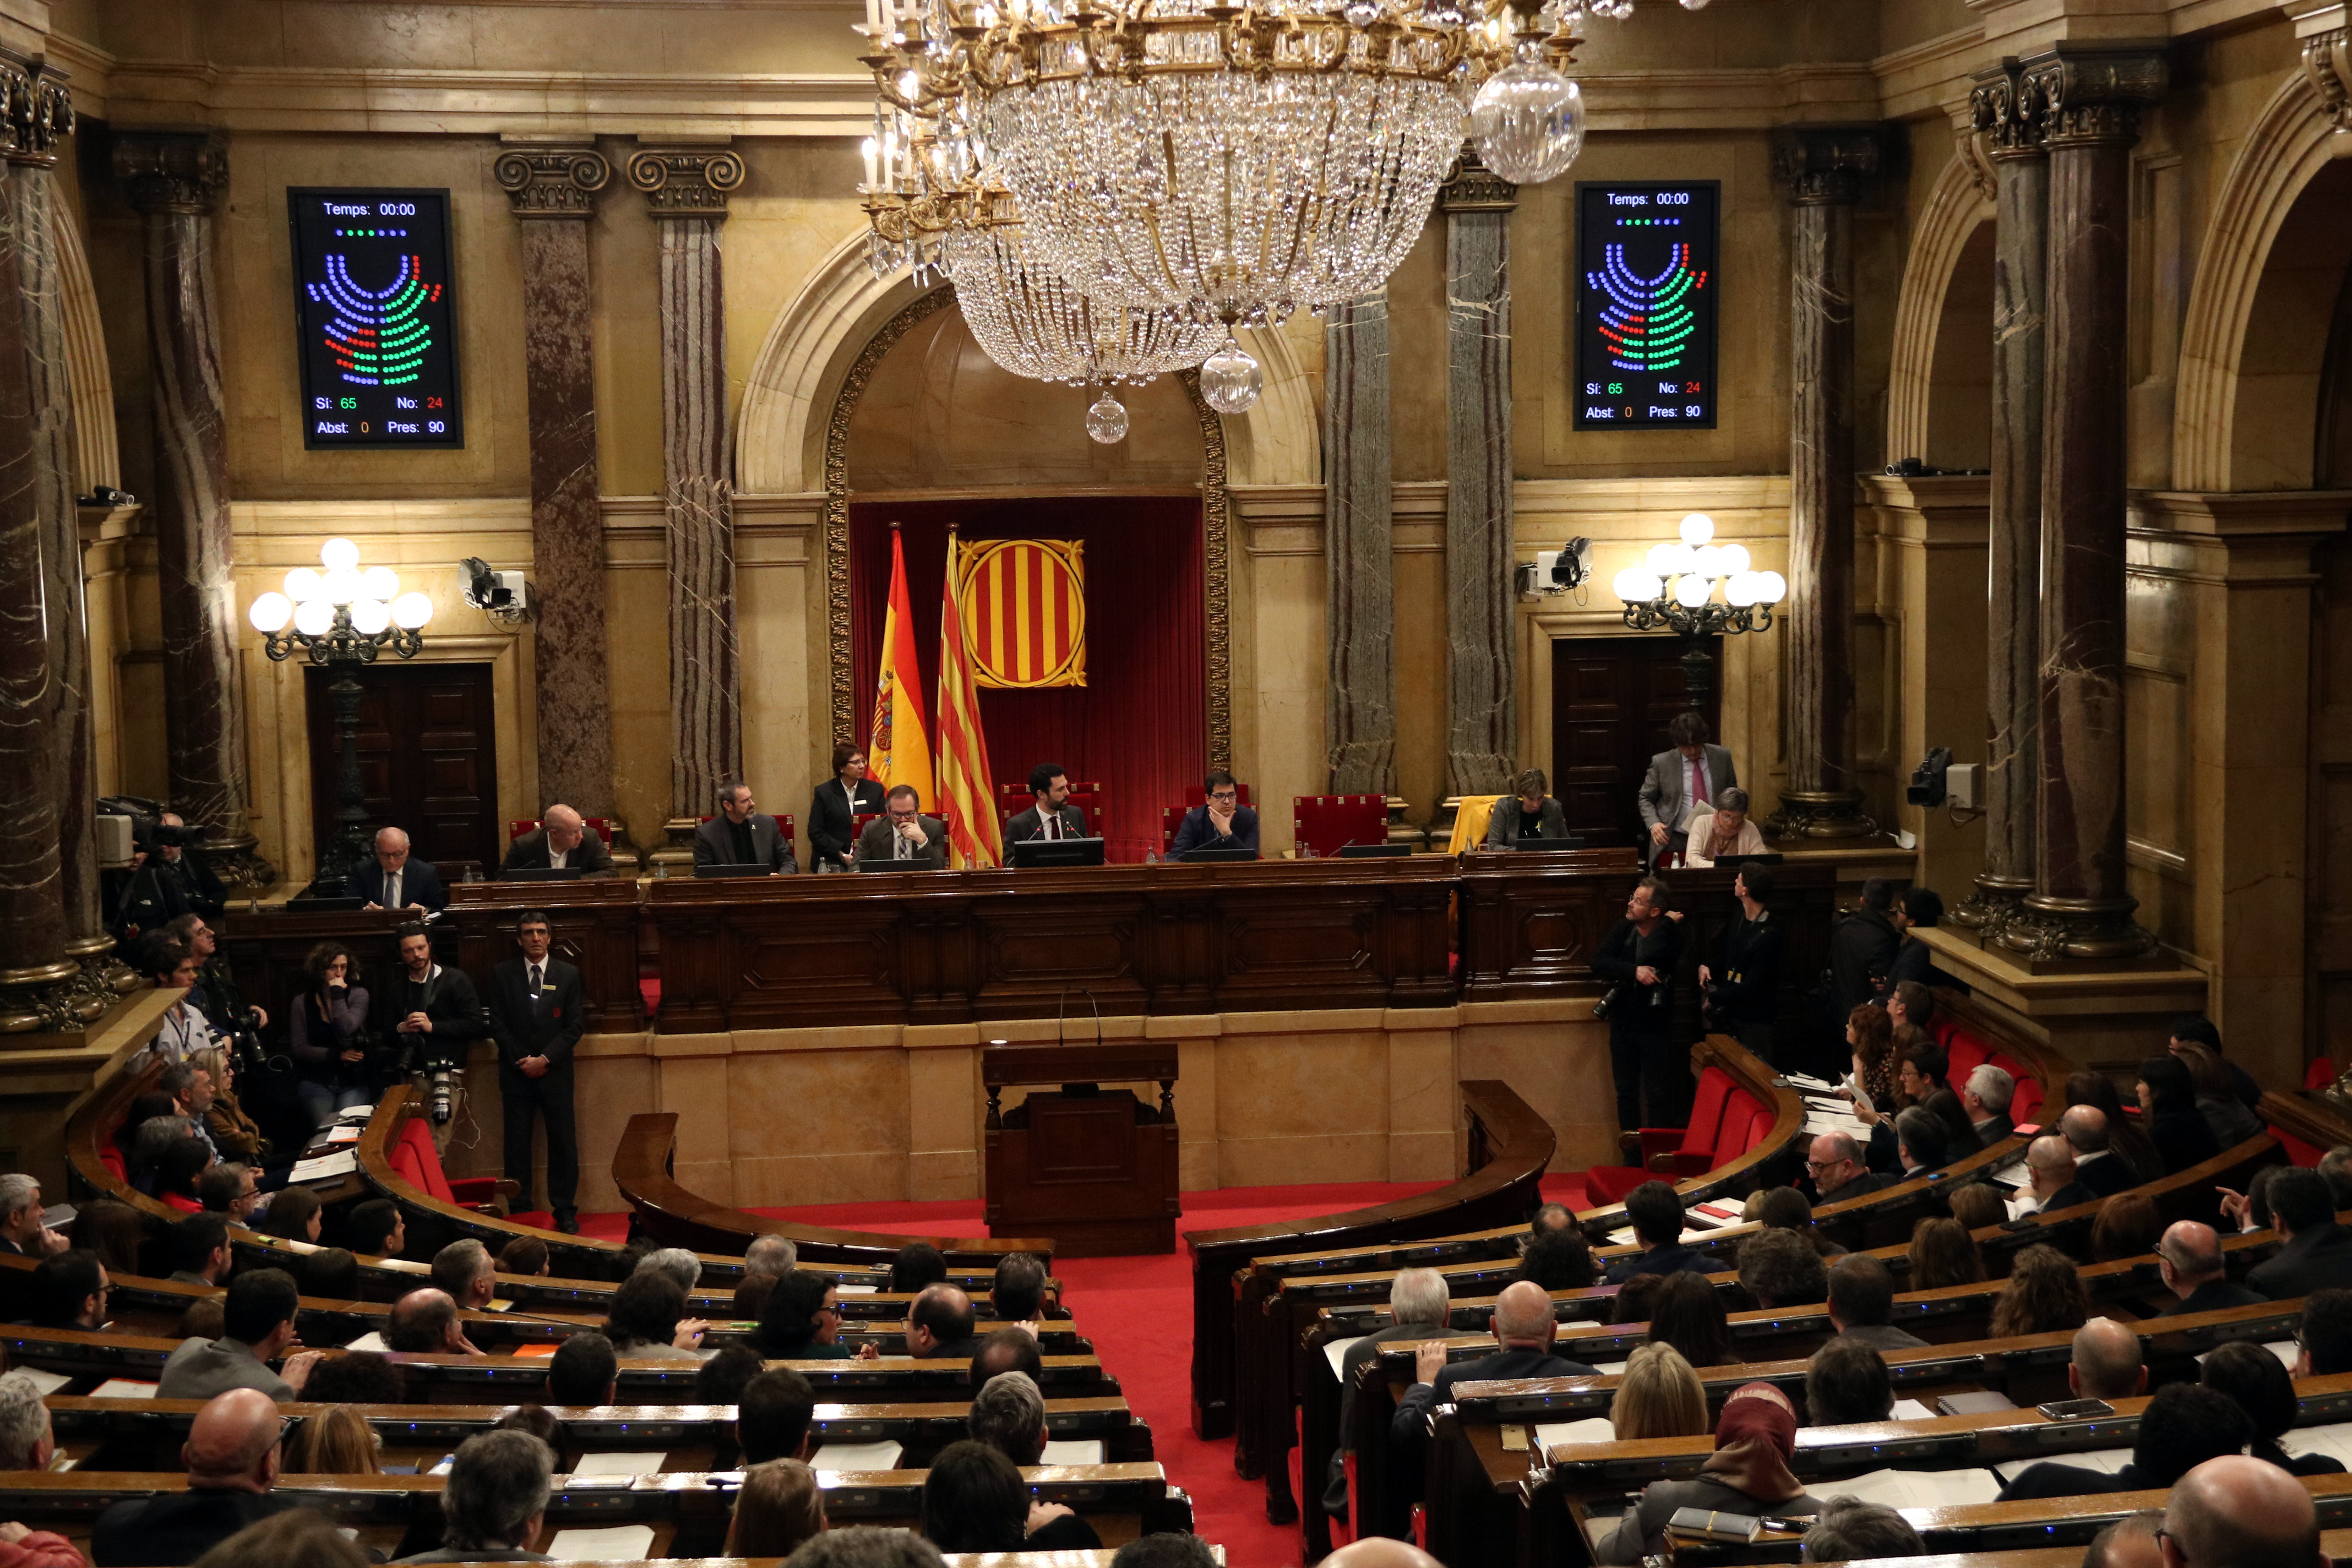 The Catalan Parliament during its plenary session on March 1 2018 (by Elisenda Rosanas)